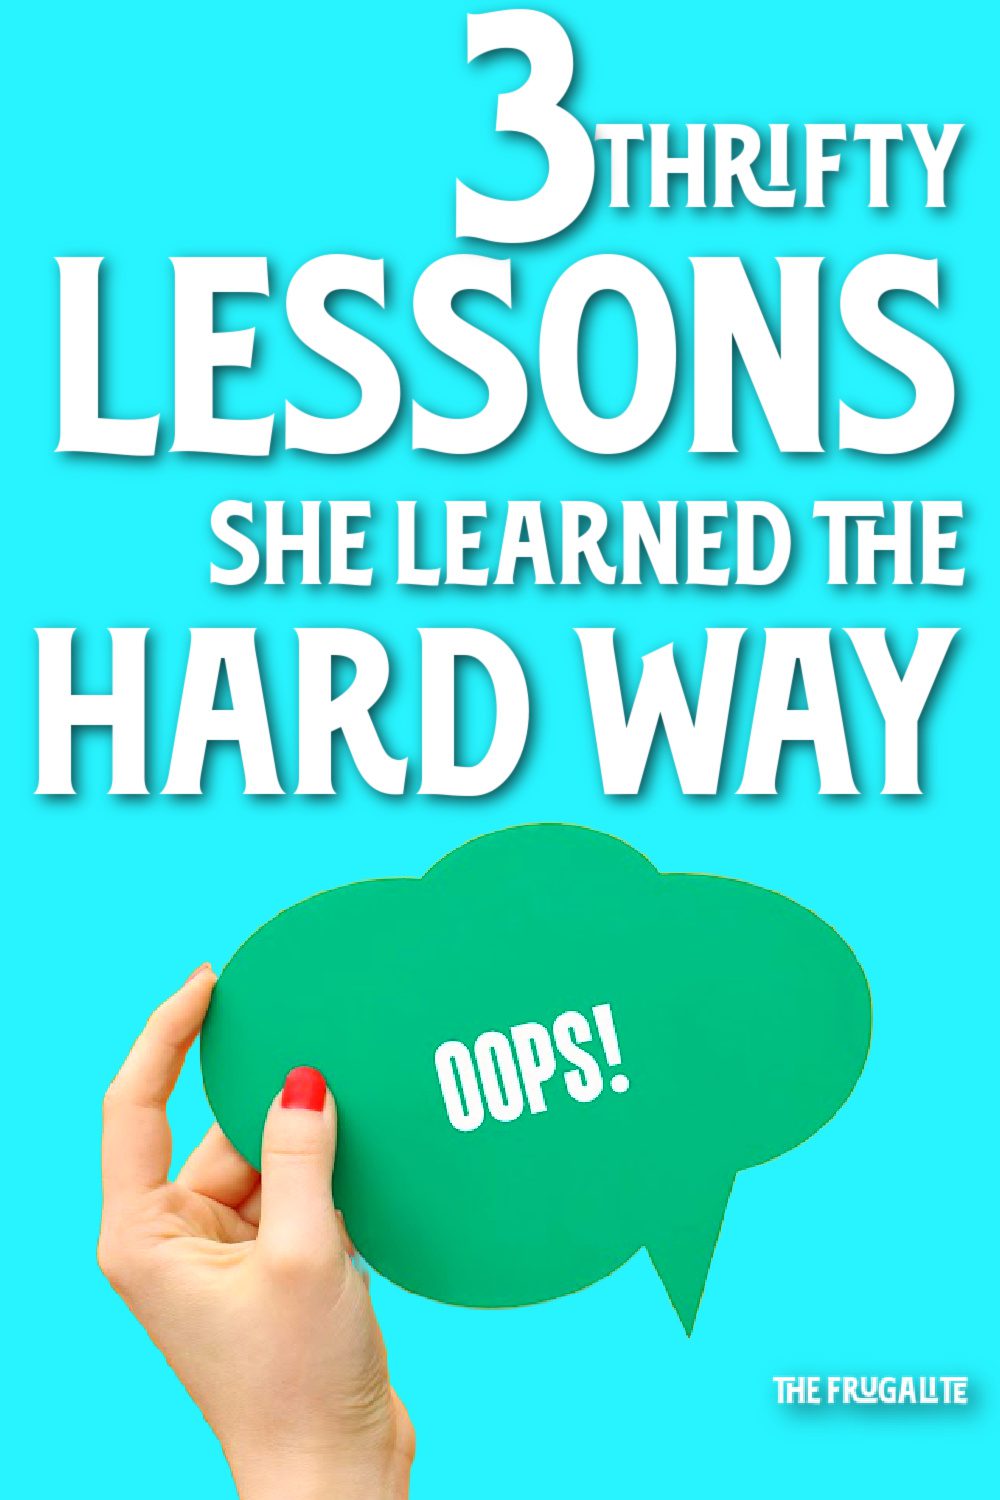 3 Thrifty Lessons She Learned the Hard Way